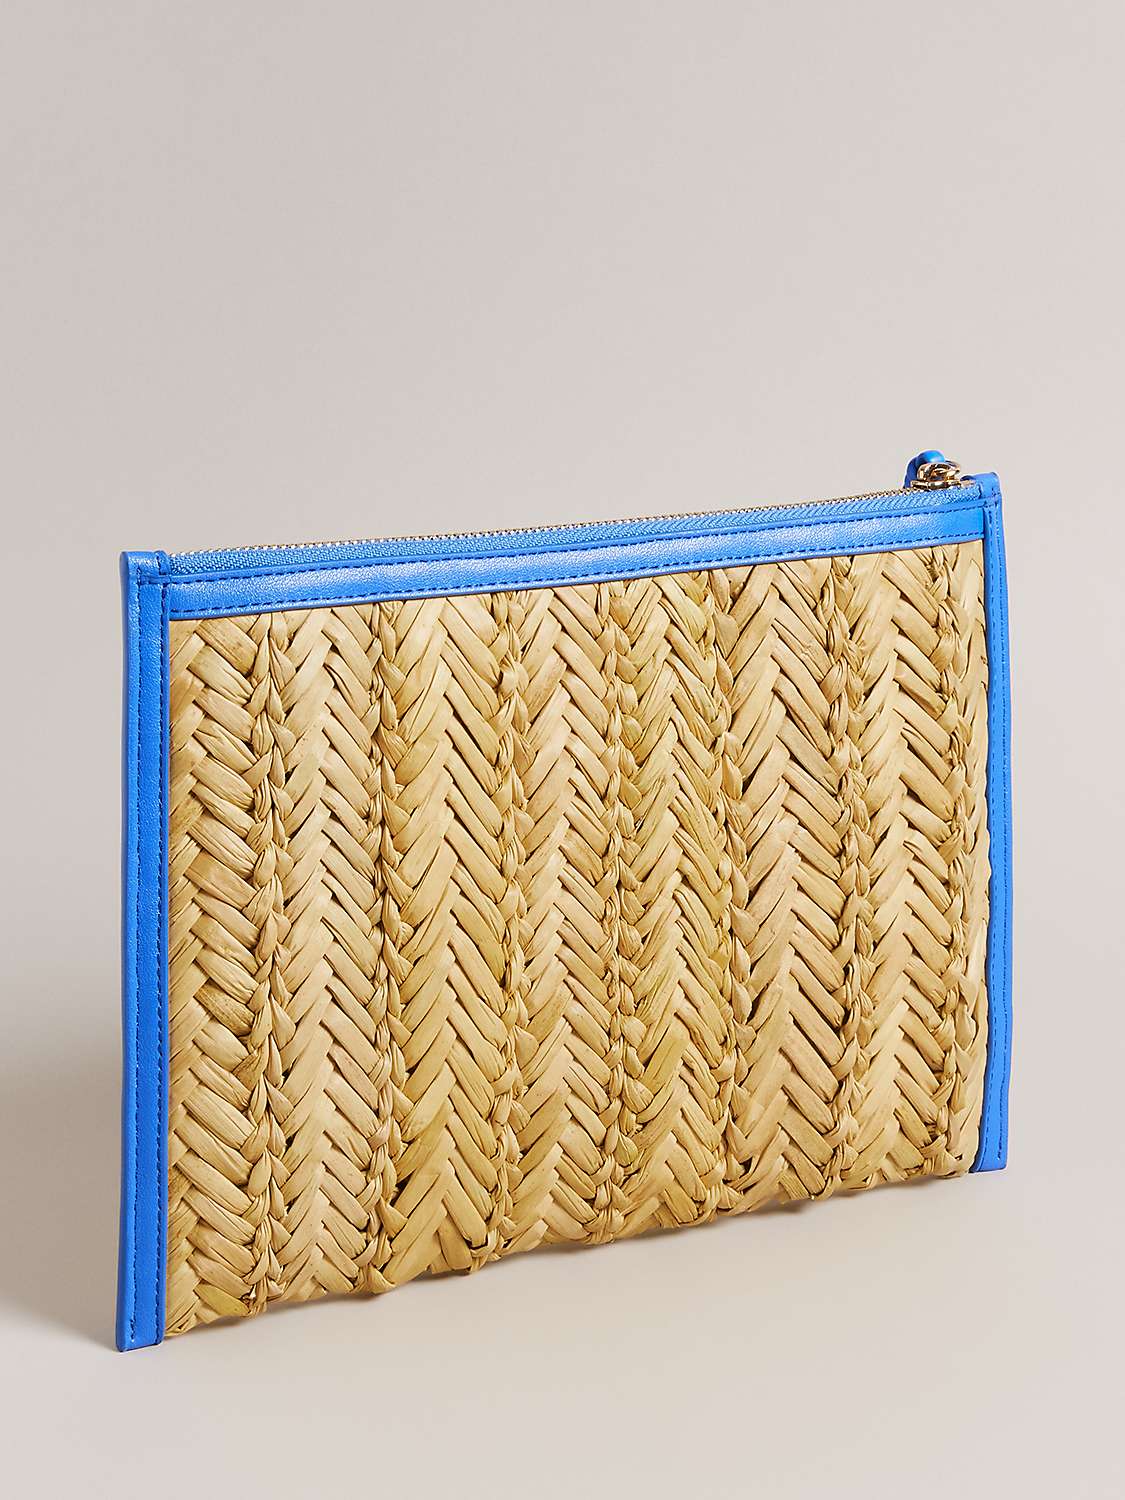 Buy Ted Baker Ivelin Woven Seagrass Clutch Bag Online at johnlewis.com